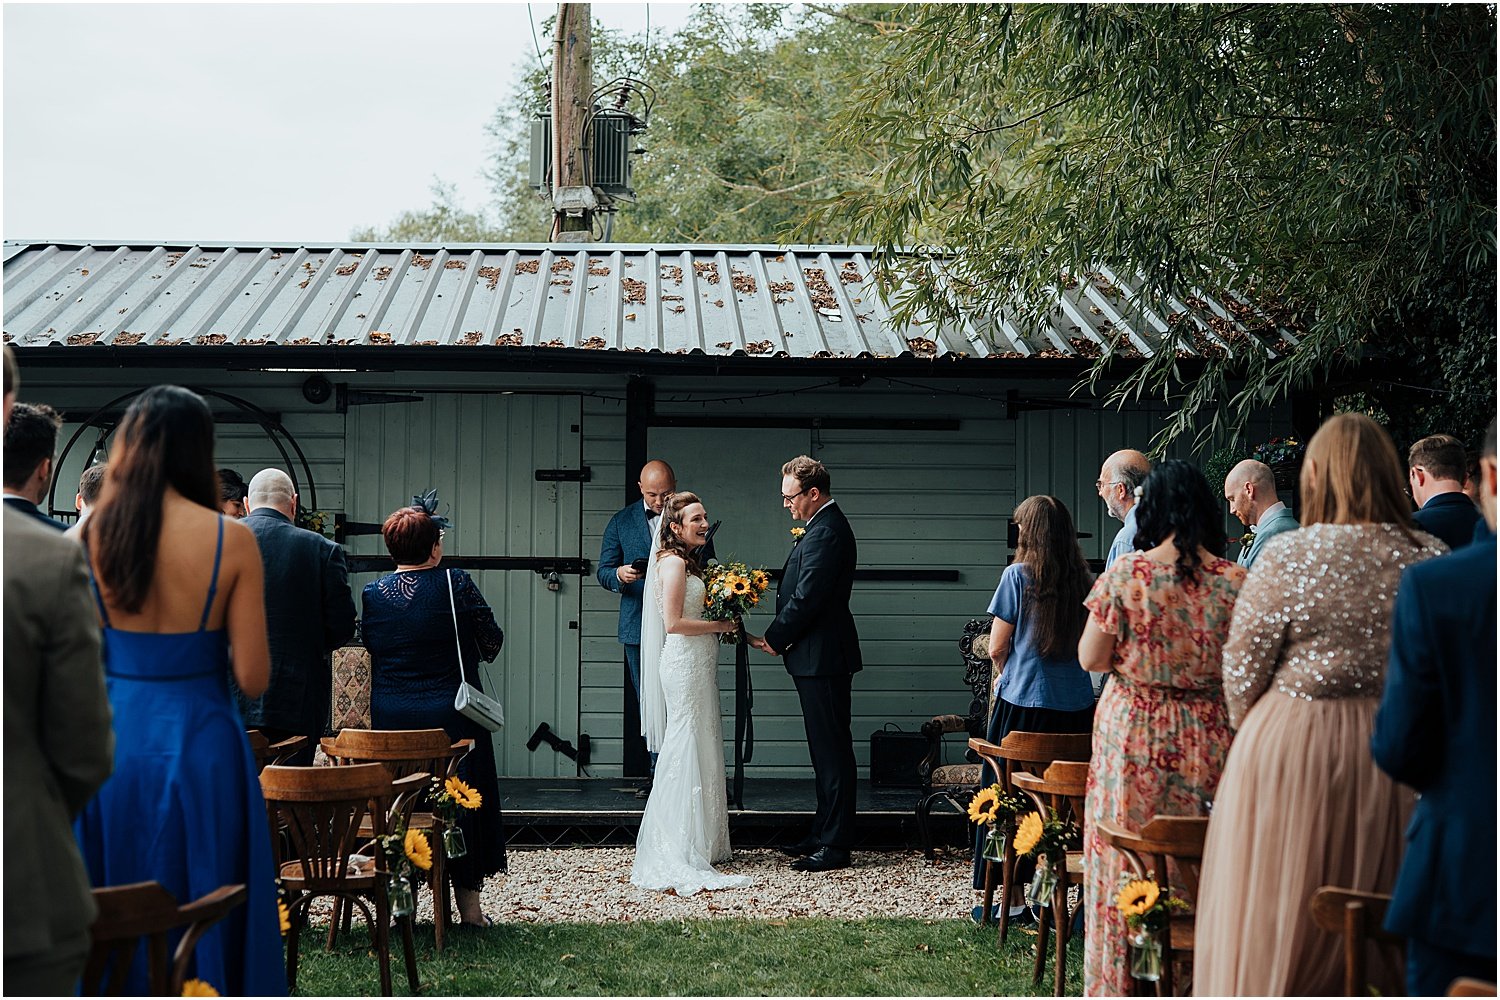 Outdoor wedding ceremony at Isis River Farmhouse